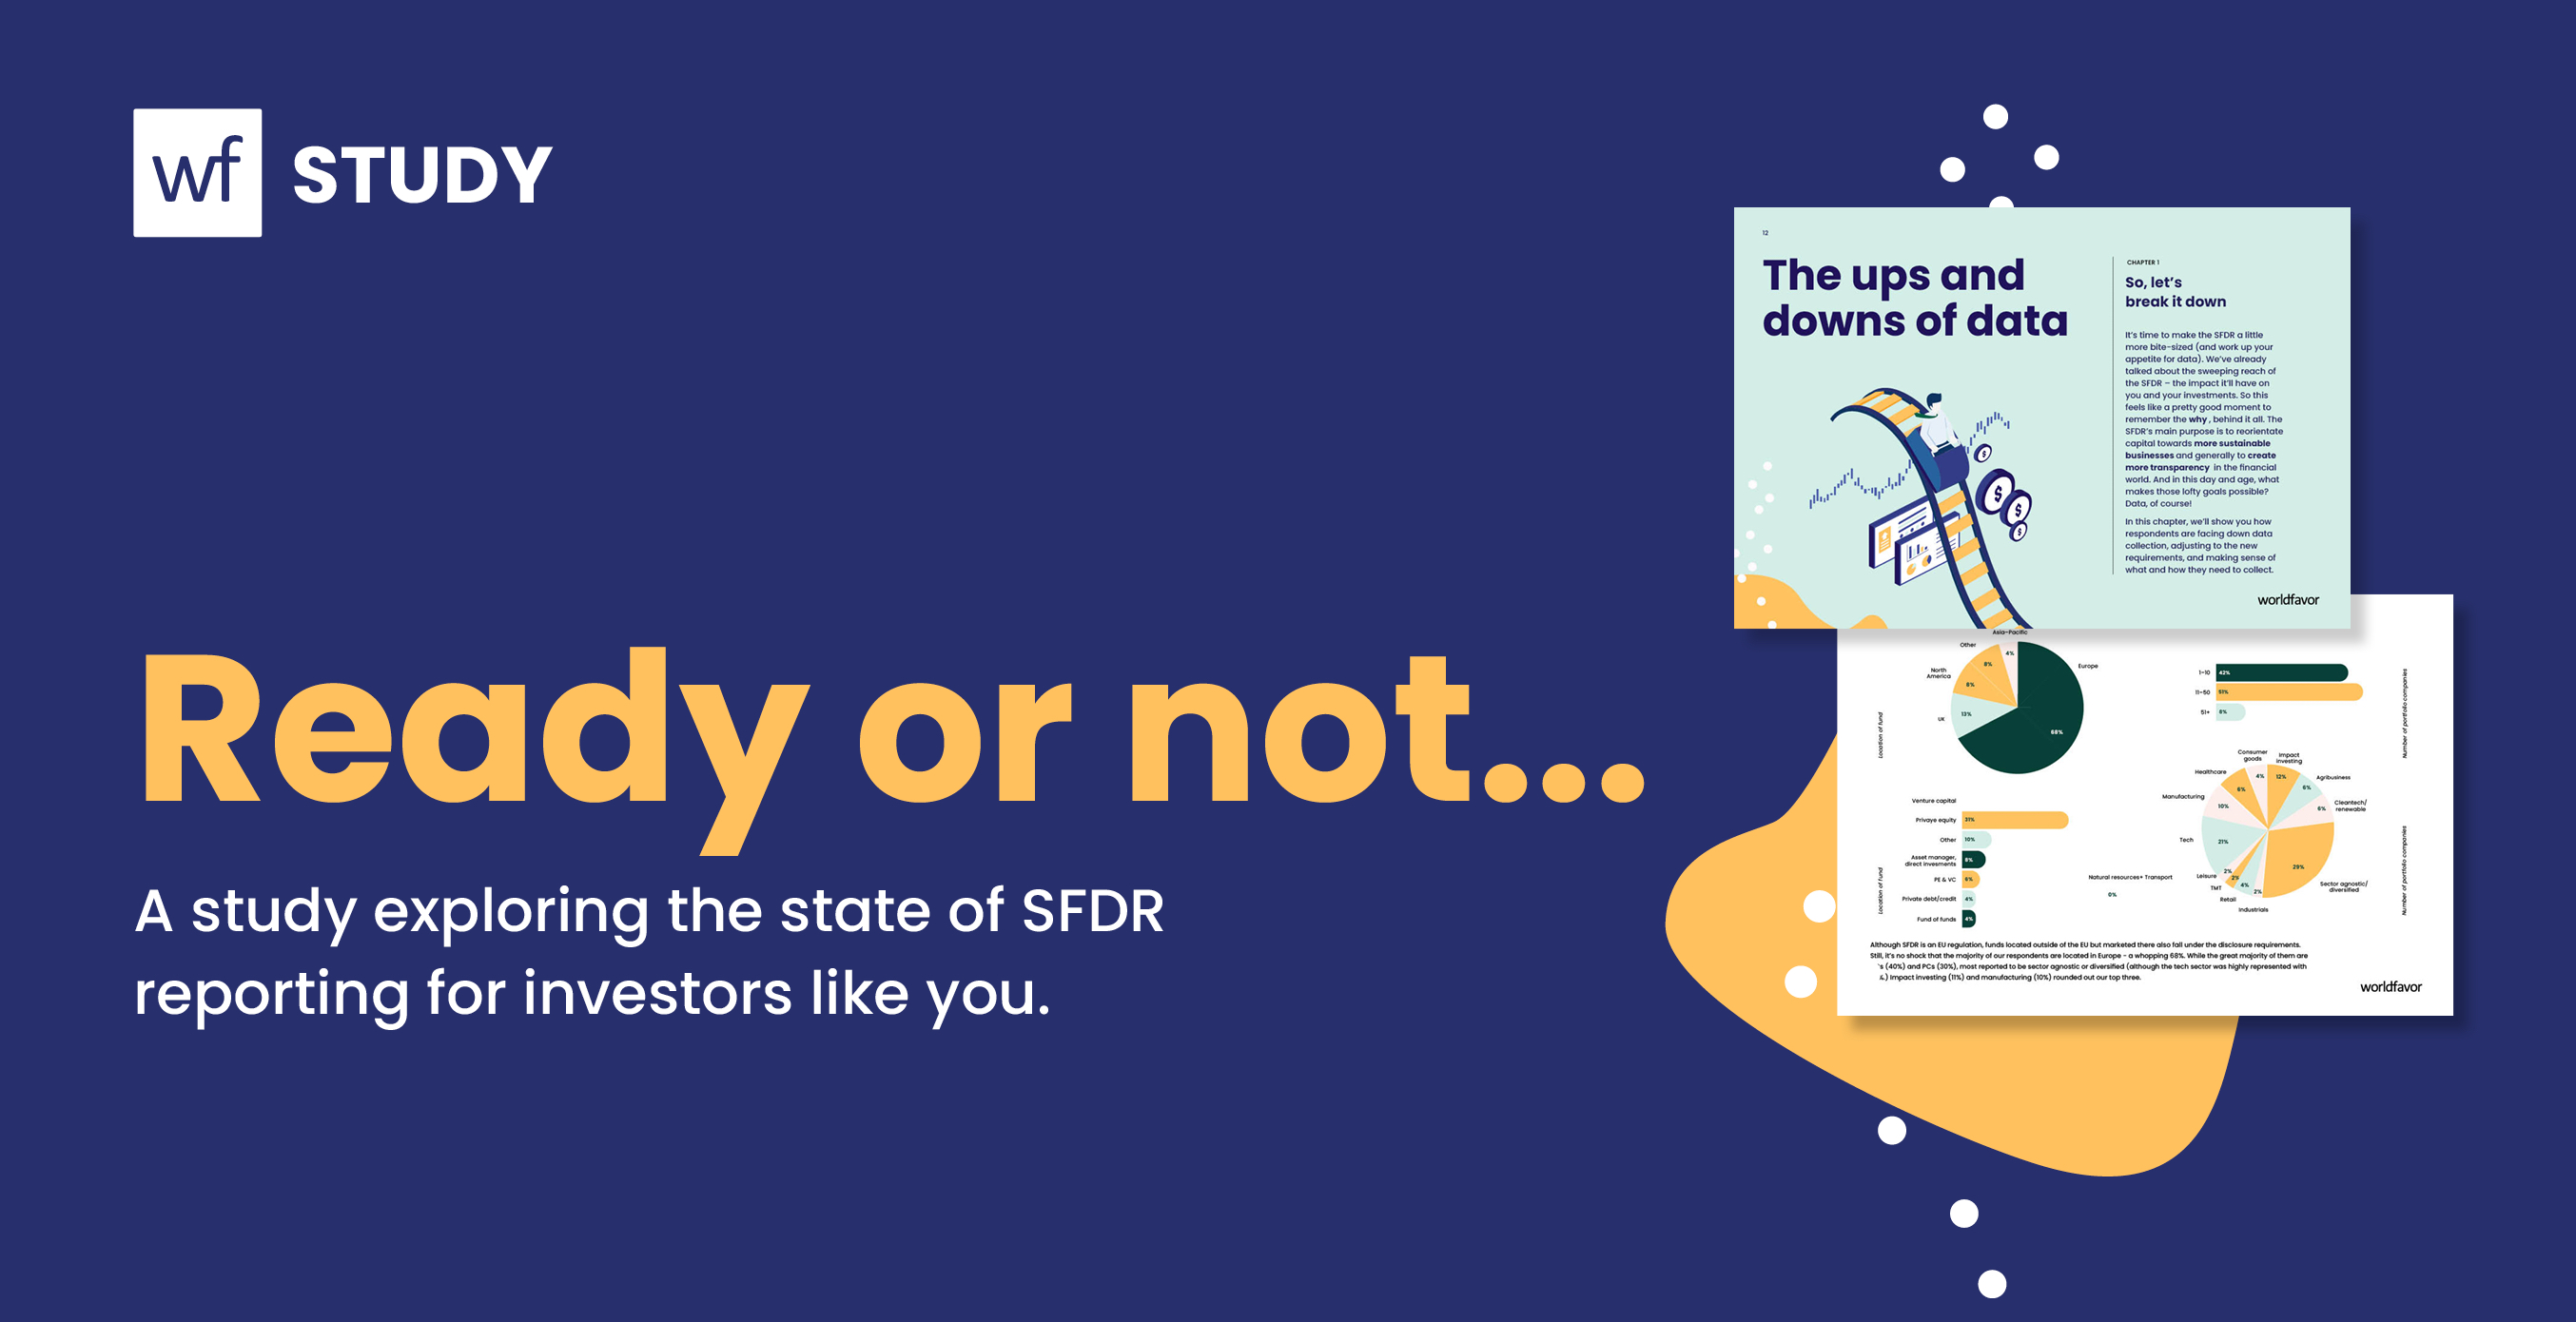 Worldfavor is releasing a study exploring the state of SFDR reporting for investors